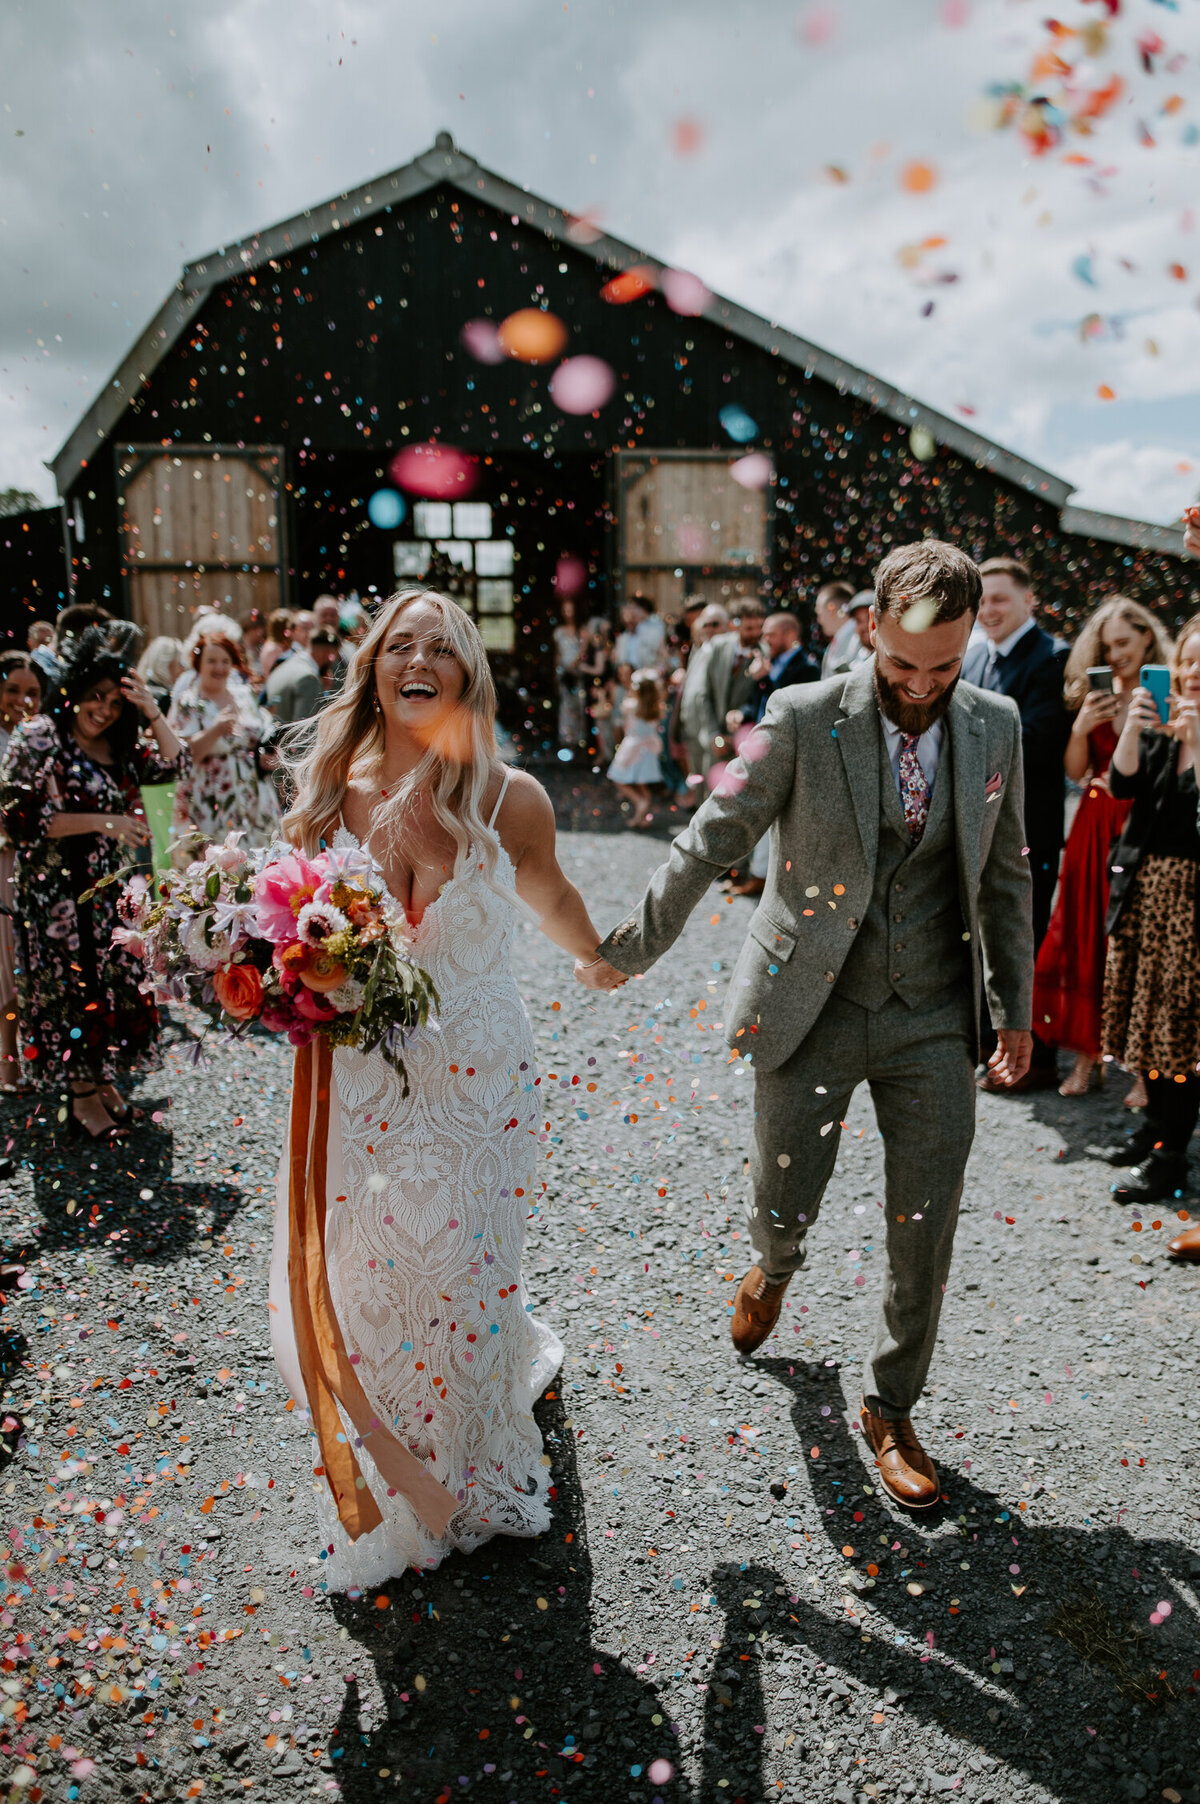 A couple exit their ceremony at The Giraffe Shed to a shower of confetti from their guests. The entire wedding was very colourful.